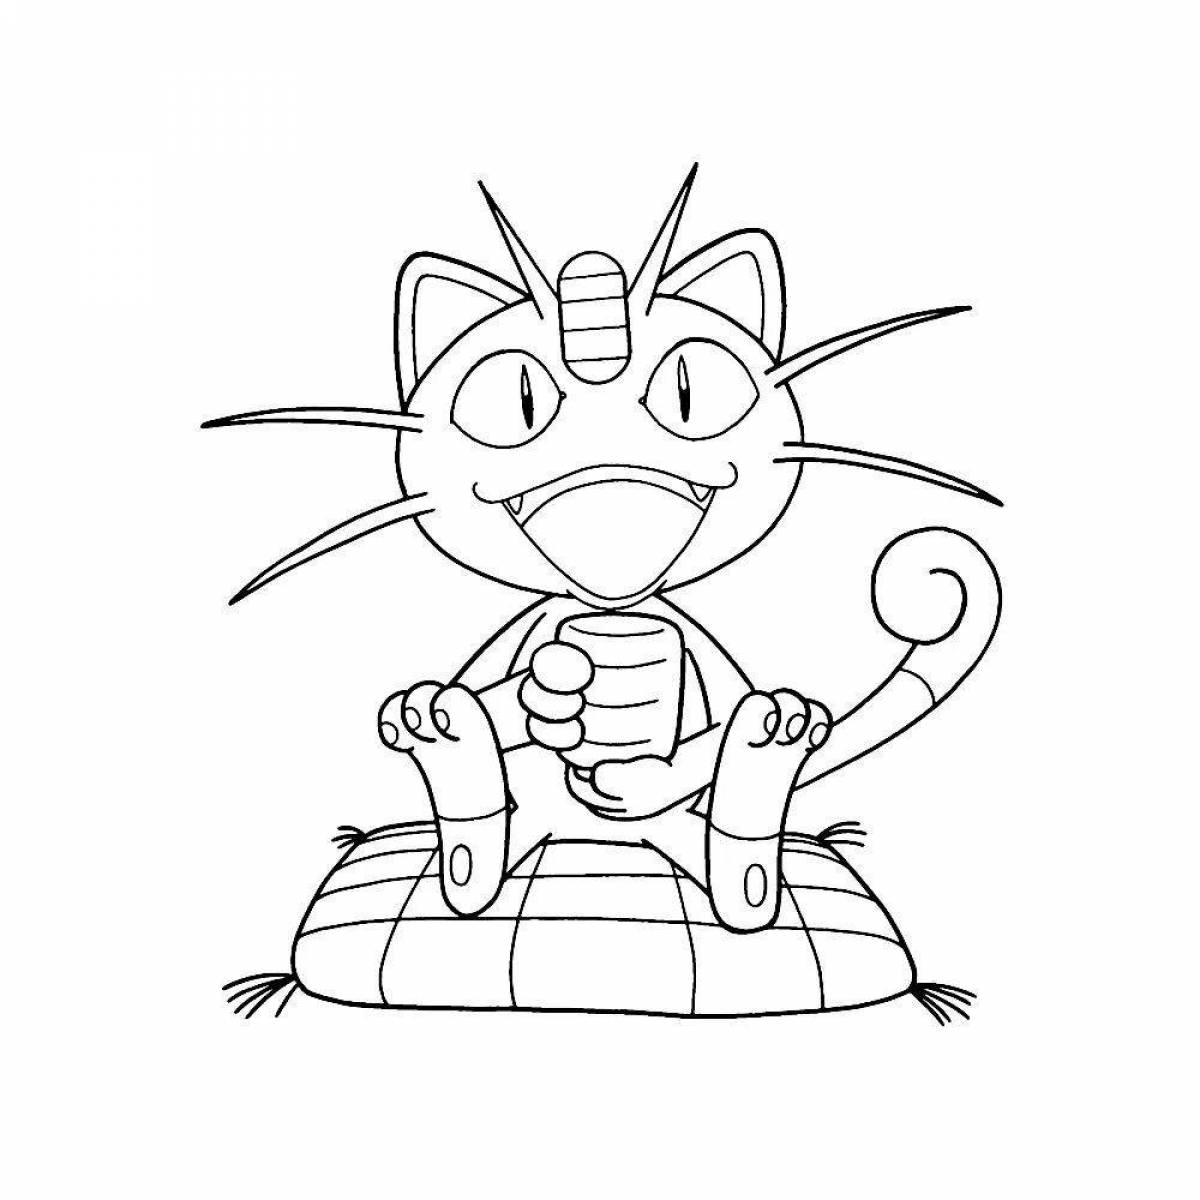 Exciting coloring meowth